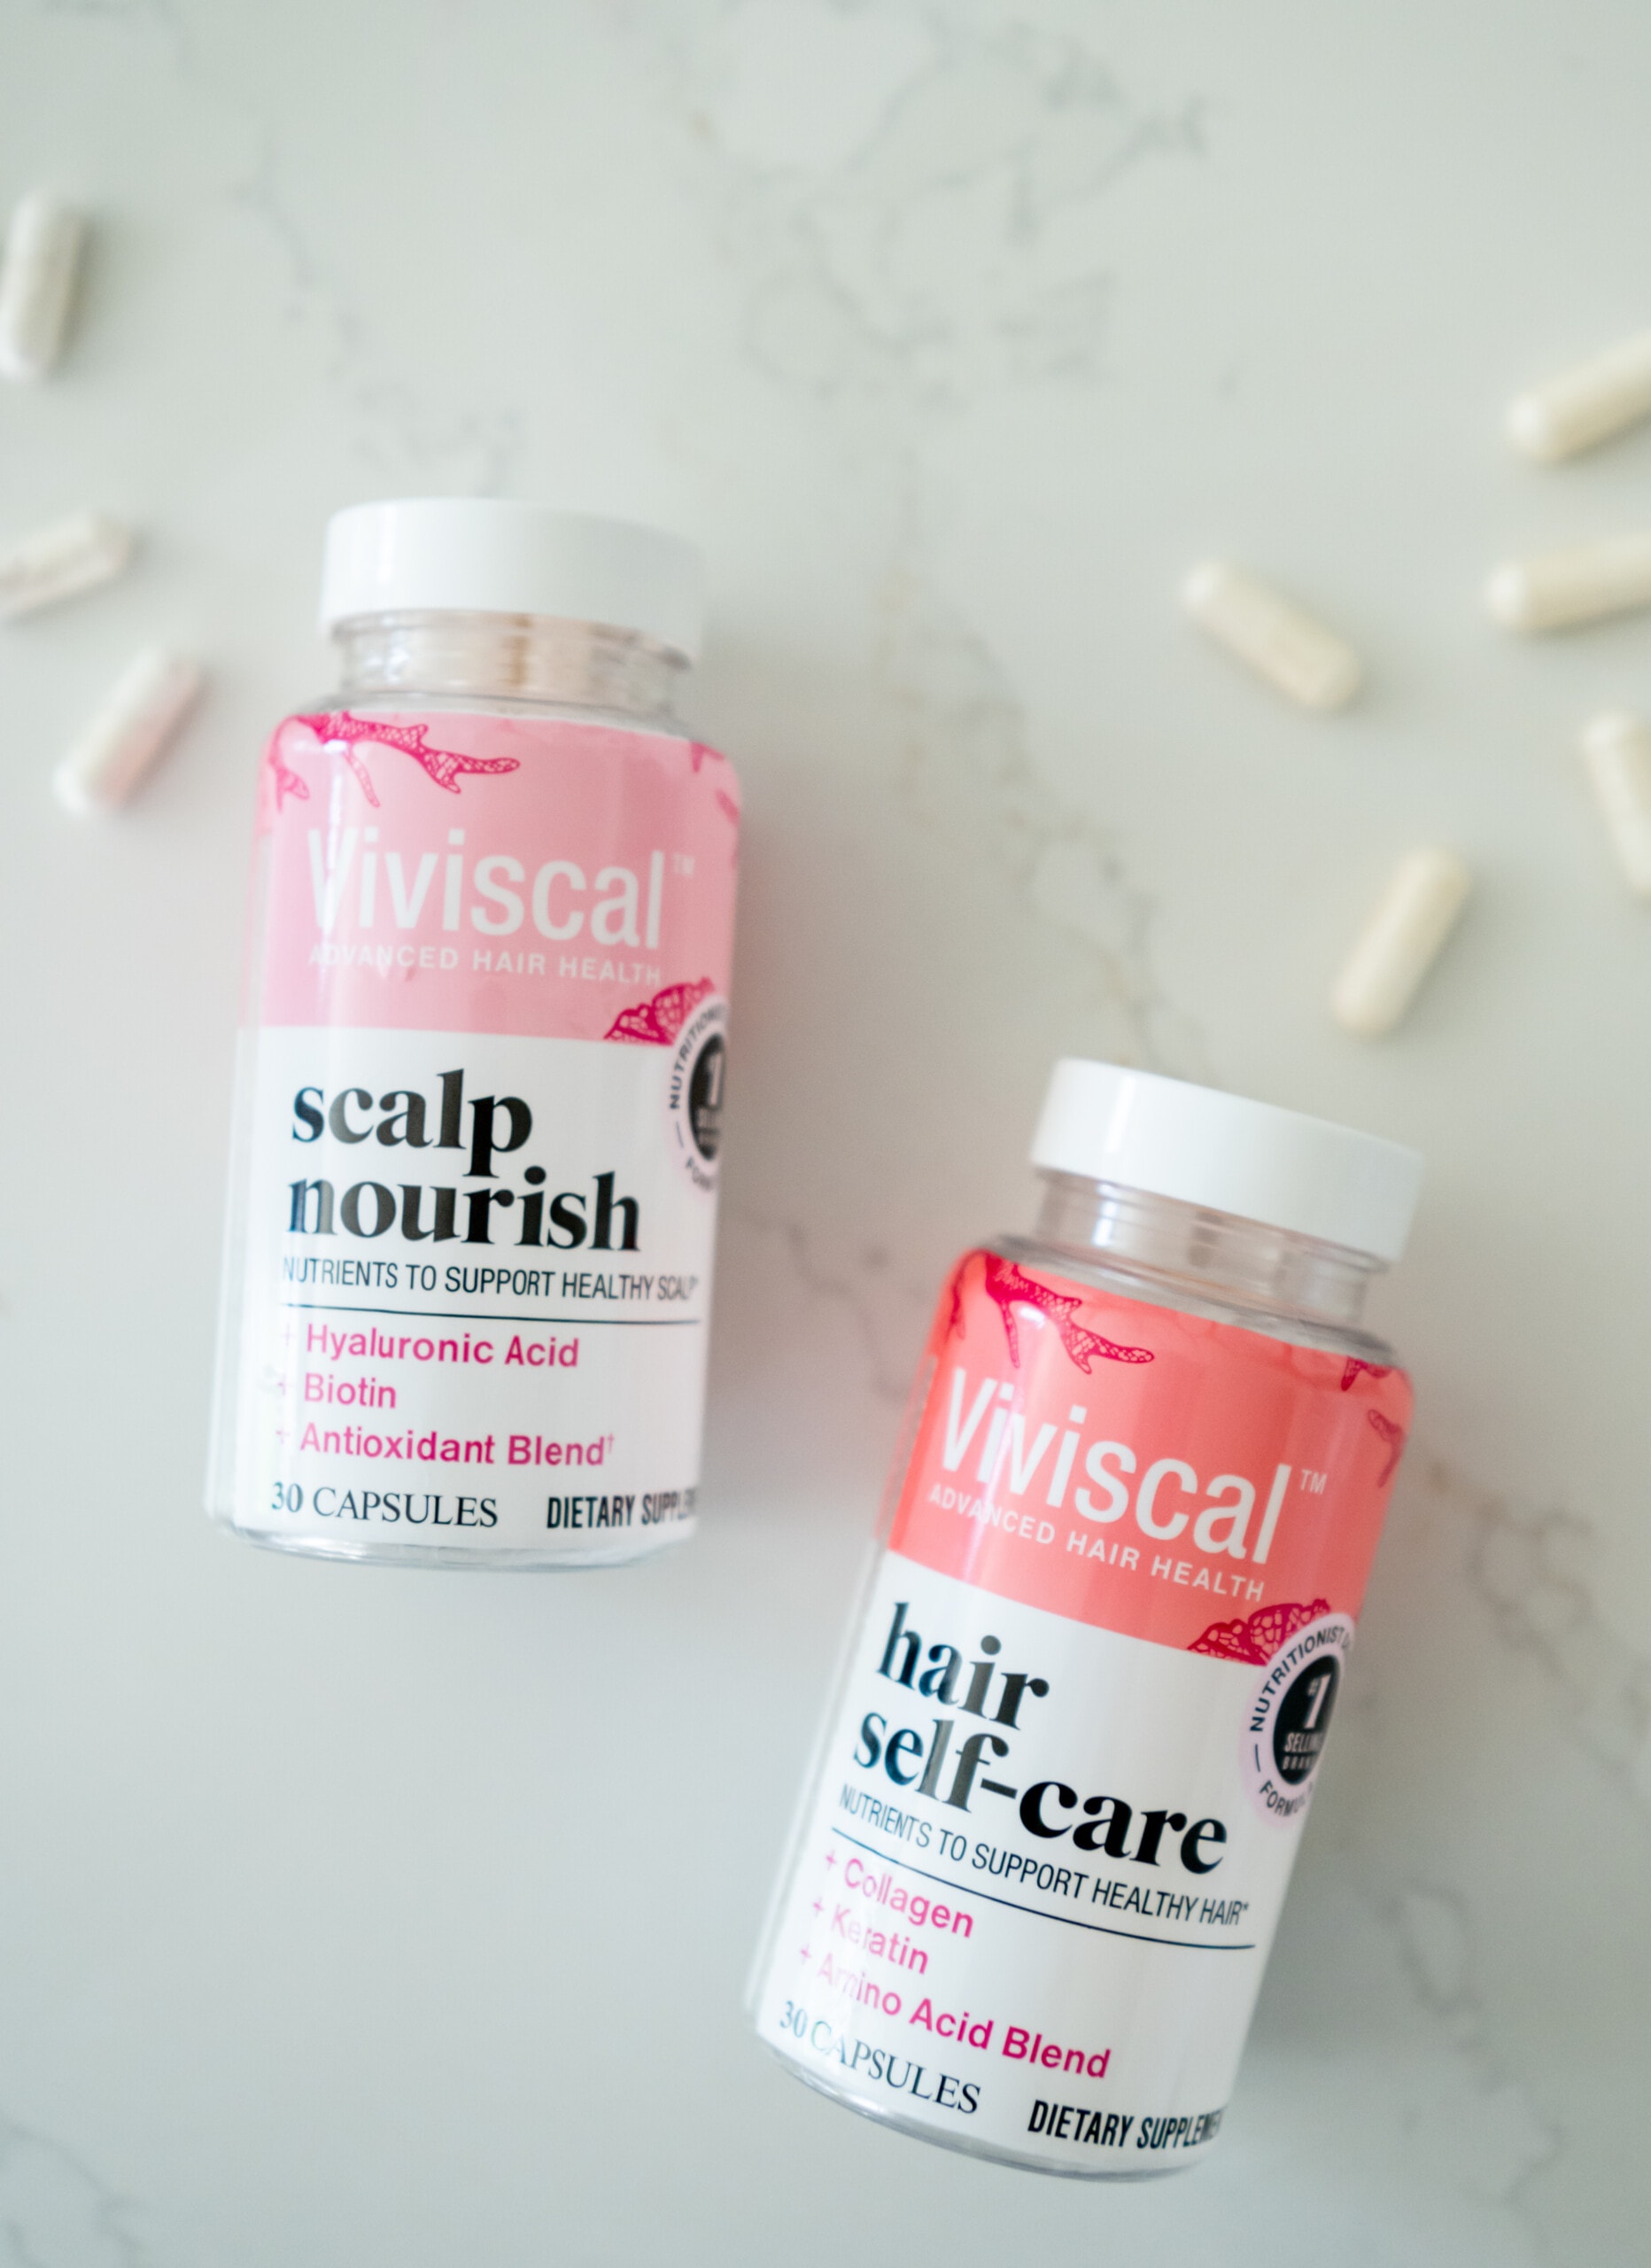 Viviscal scalp nourish and hair self-care supplements